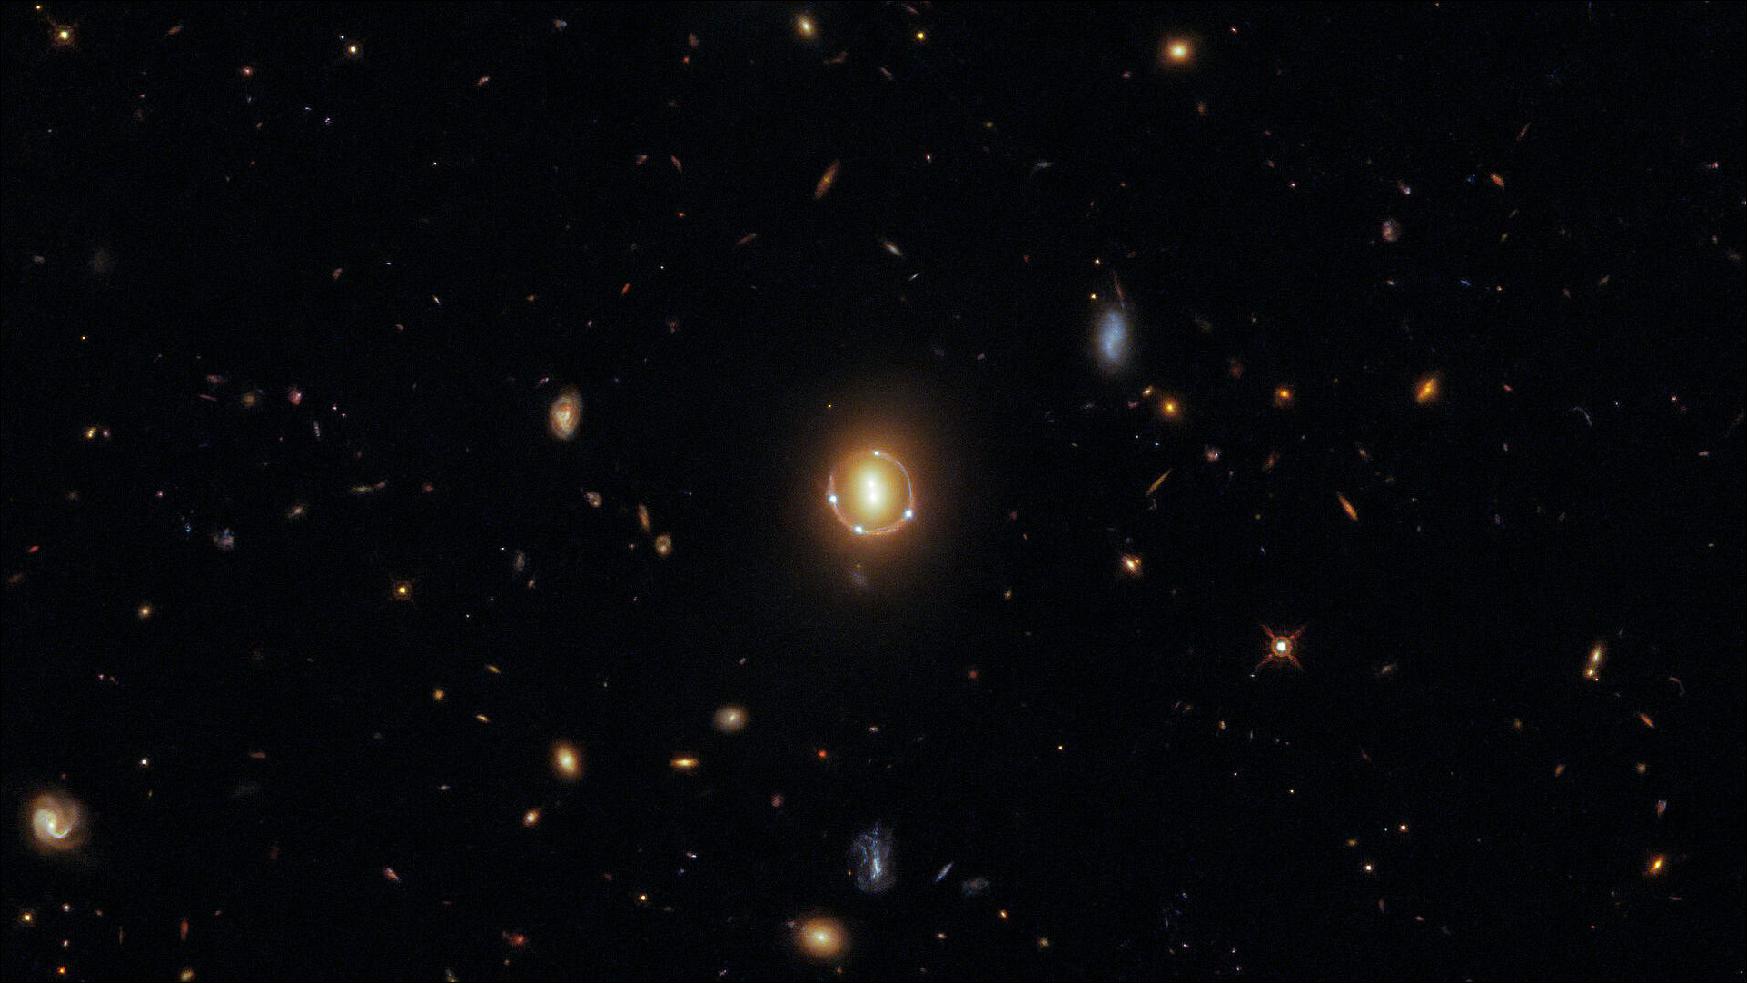 Figure 57: These galaxies were imaged in spectacular detail by Hubble’s Wide Field Camera 3 (WFC3), which was installed on Hubble in 2009 during Hubble Servicing Mission 4, Hubble’s final servicing mission. The WFC3 was intended to operate until 2014, but 12 years after it was installed it continues to provide both top-quality data and fantastic images, such as this one (image credit: ESA/Hubble & NASA, T. Treu; CC BY 4.0 Acknowledgment: J. Schmidt)